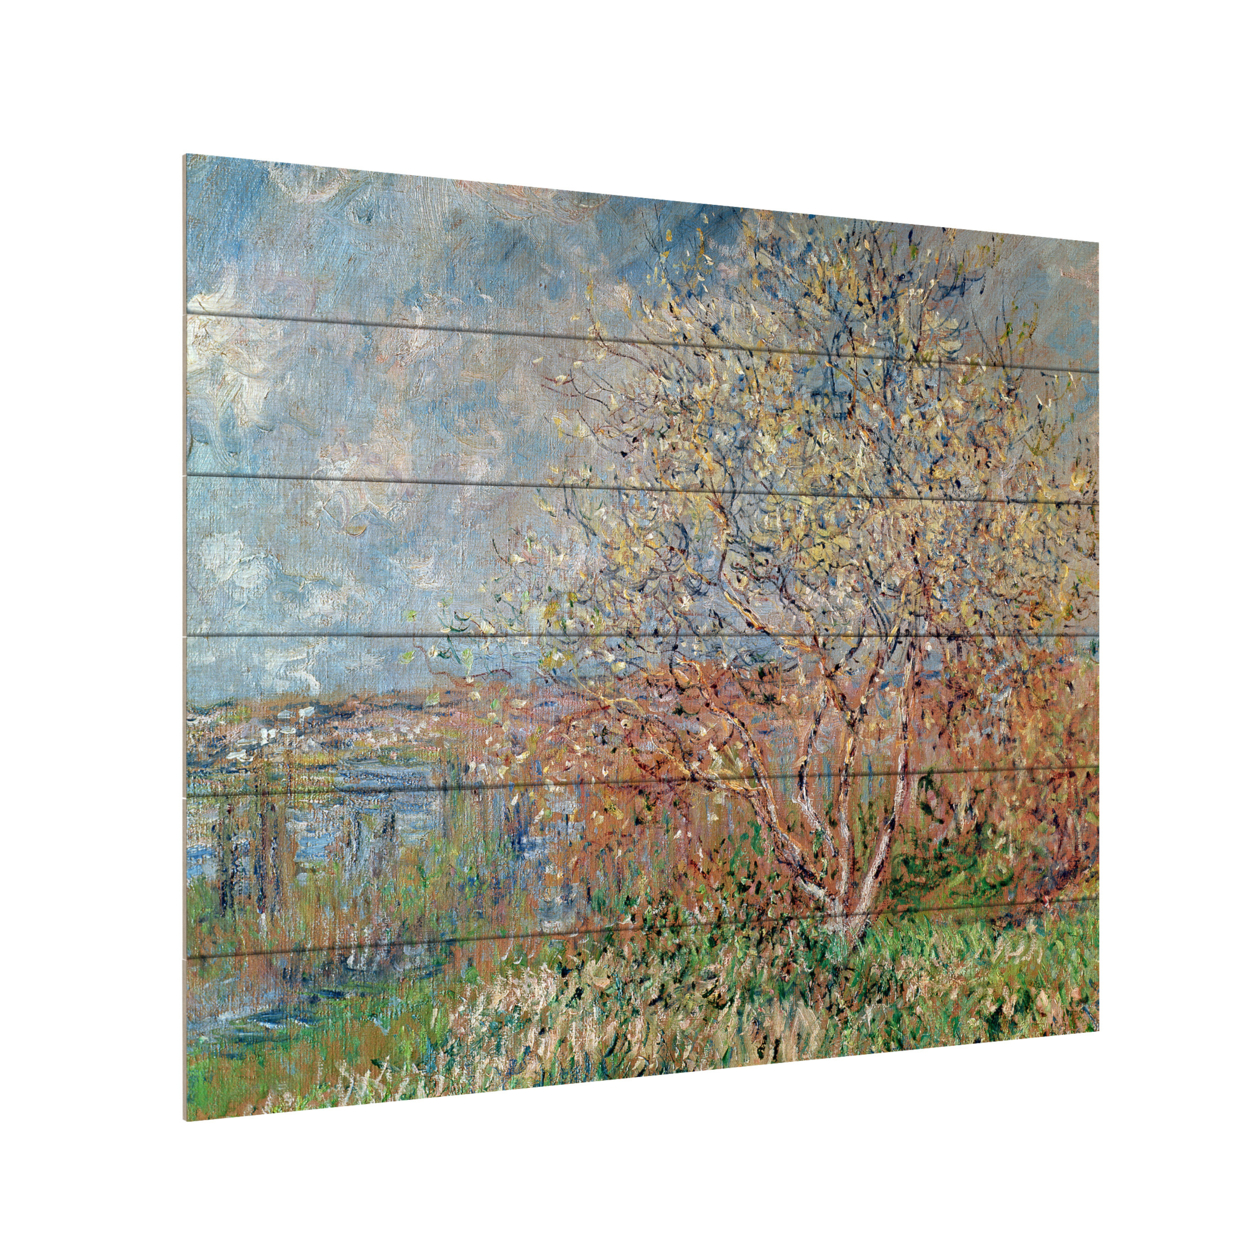 Wooden Slat Art 18 X 22 Inches Titled Spring 1880 Ready To Hang Home Decor Picture